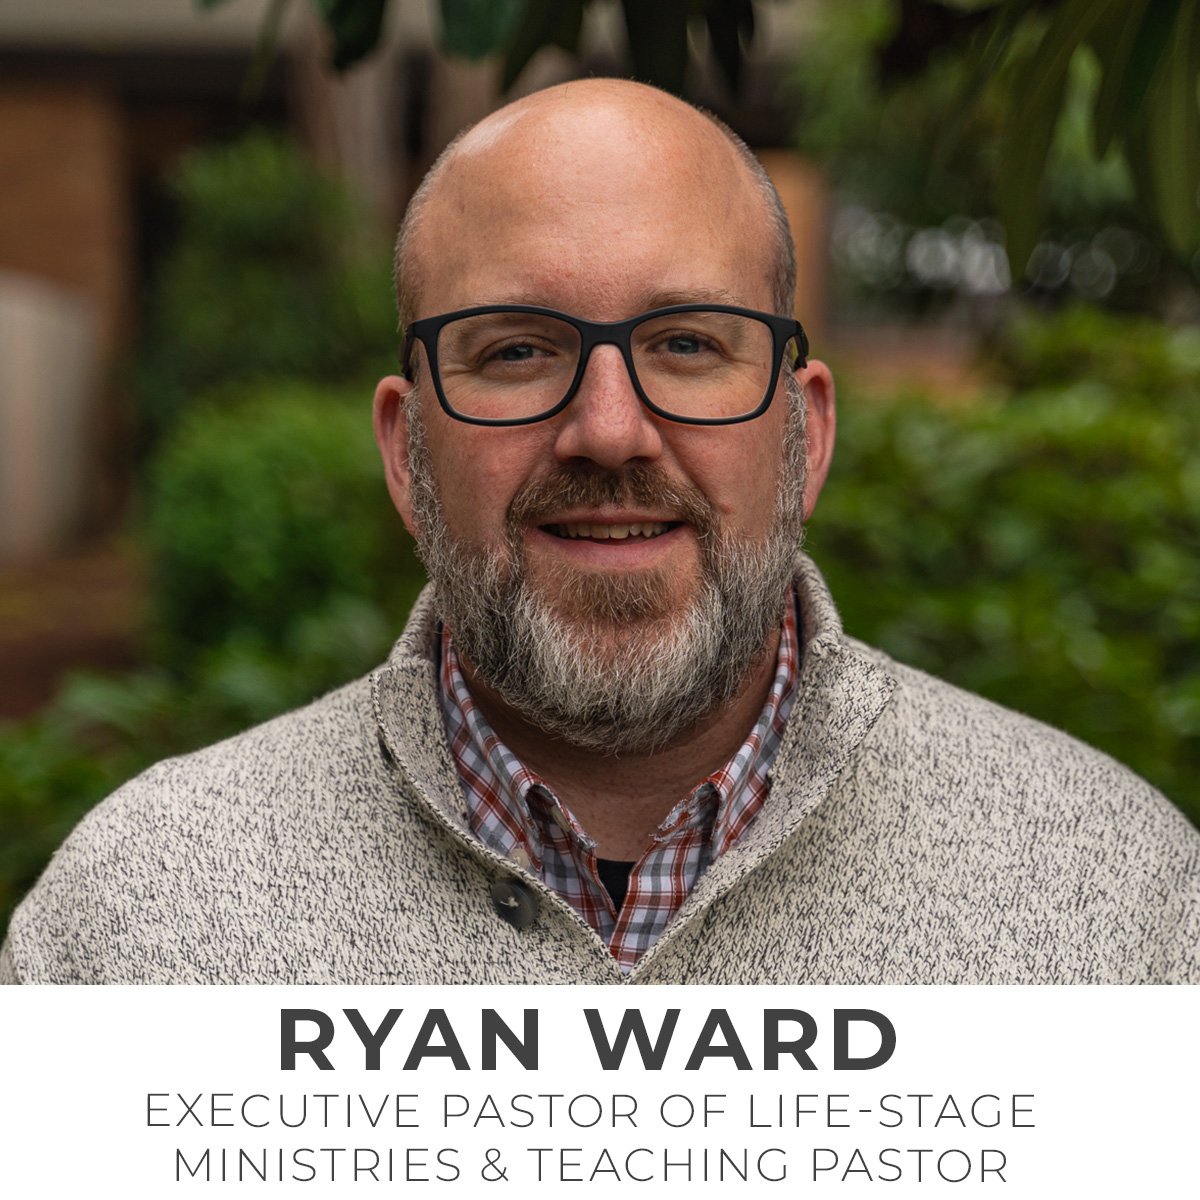 Ryan Ward, Executive Pastor of Life-Stage Ministries